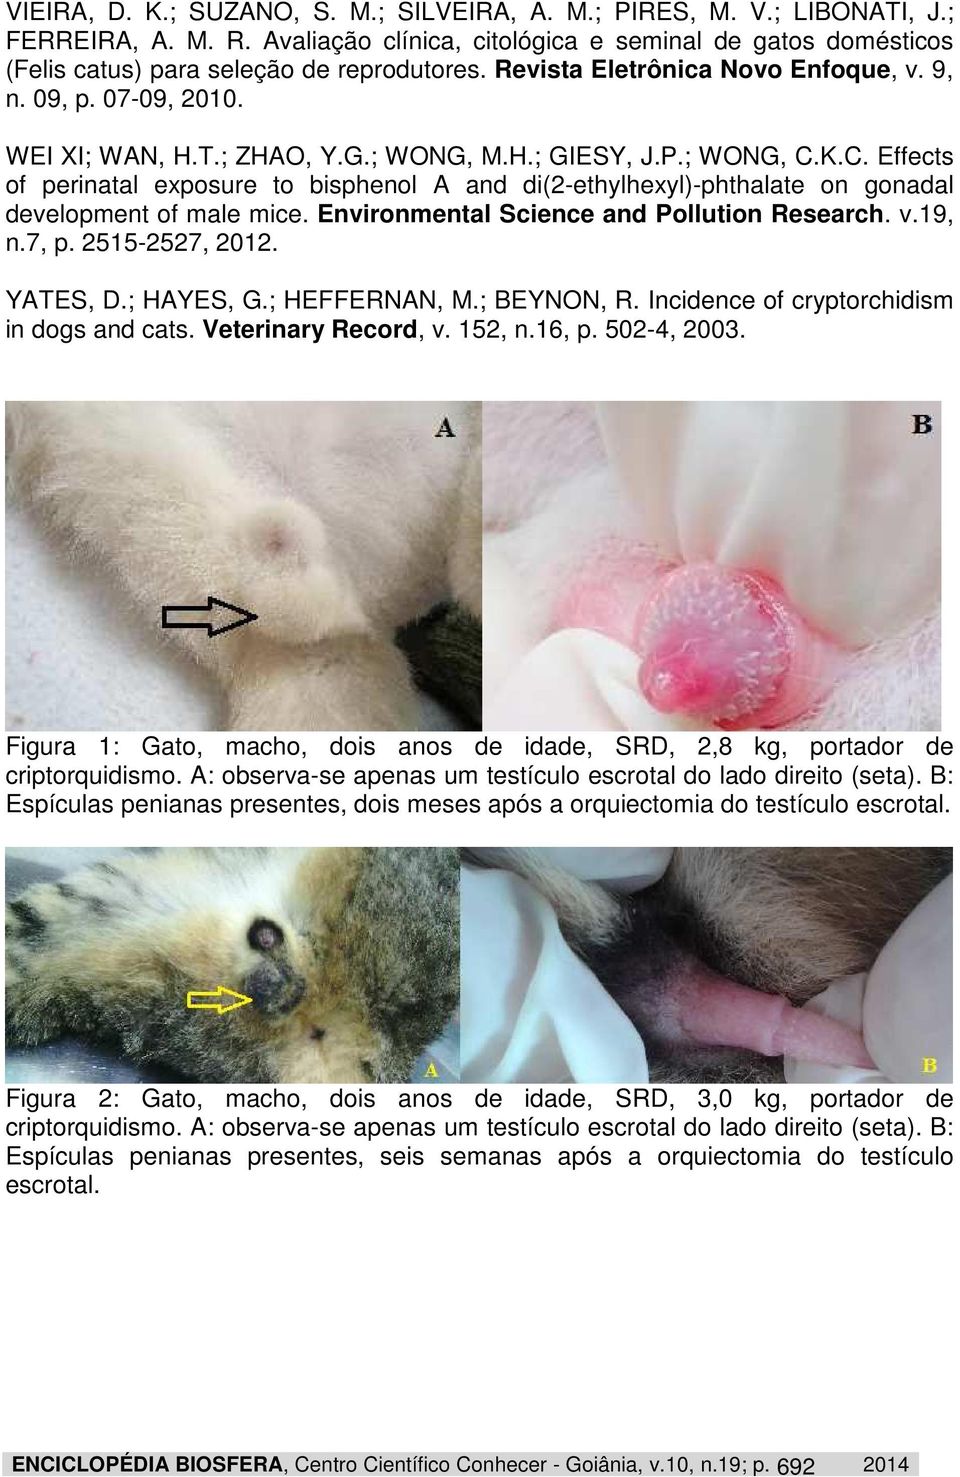 K.C. Effects of perinatal exposure to bisphenol A and di(2-ethylhexyl)-phthalate on gonadal development of male mice. Environmental Science and Pollution Research. v.19, n.7, p. 2515-2527, 2012.